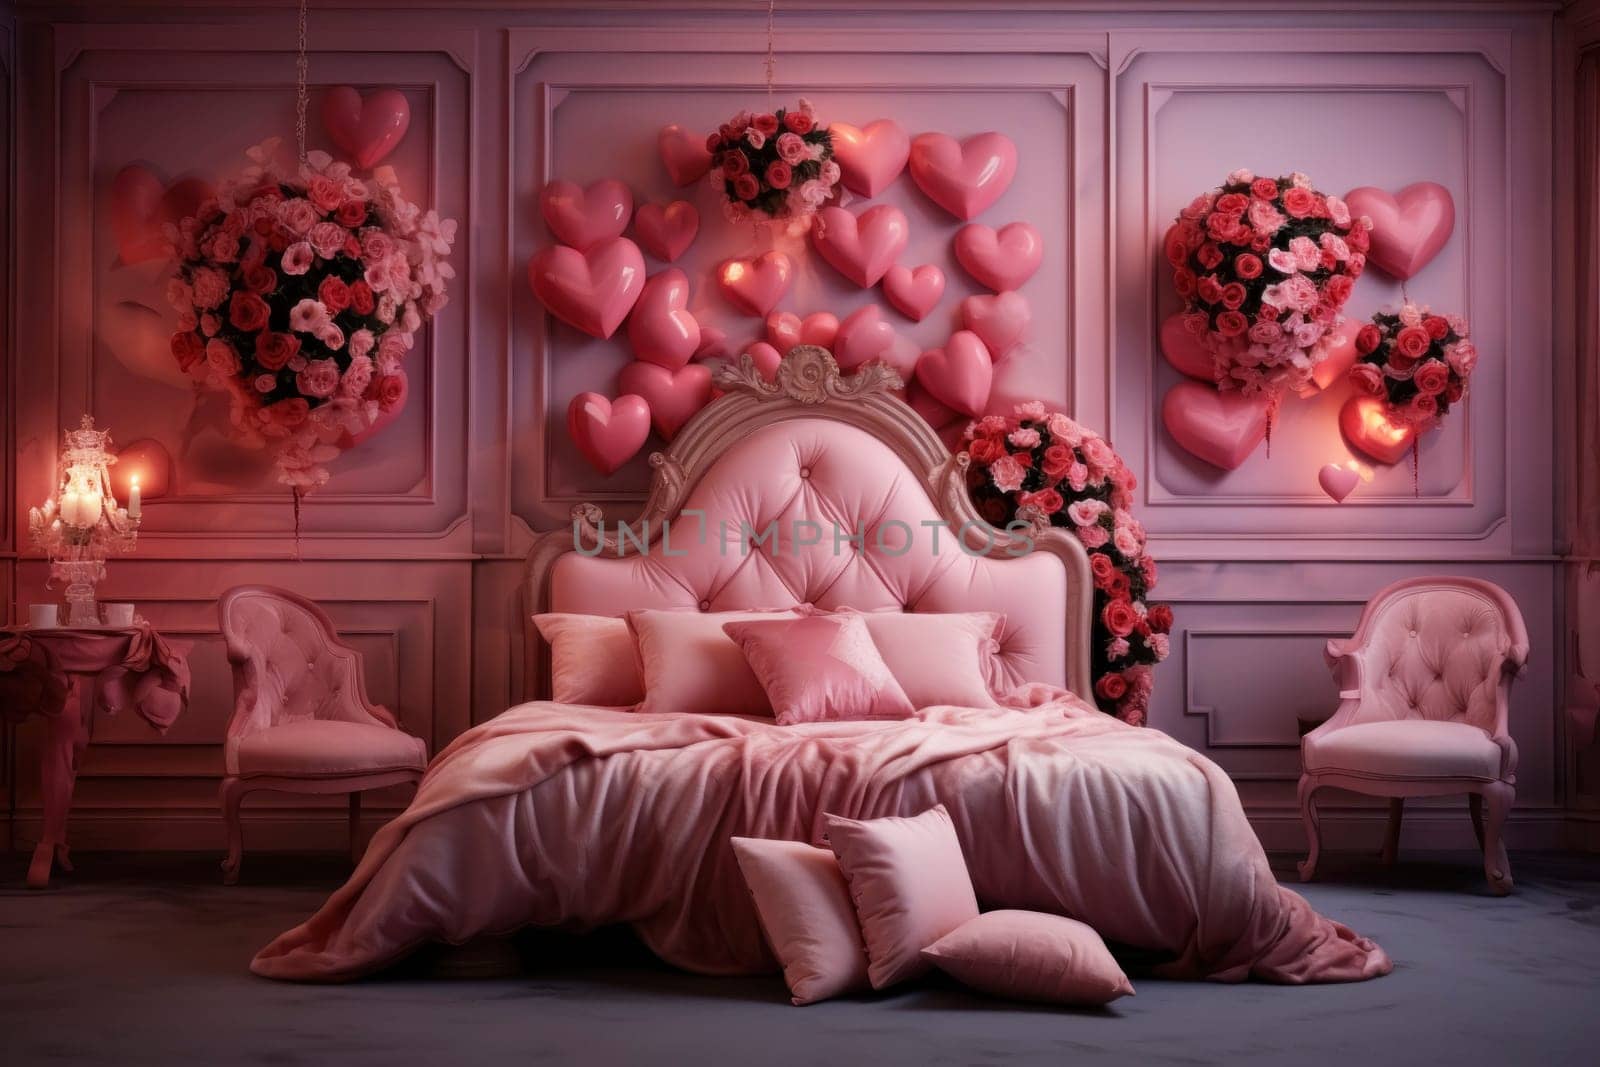 A luxurious bedroom adorned with heart-shaped balloons and lavish rose arrangements, embodying a romantic Valentine's Day theme.